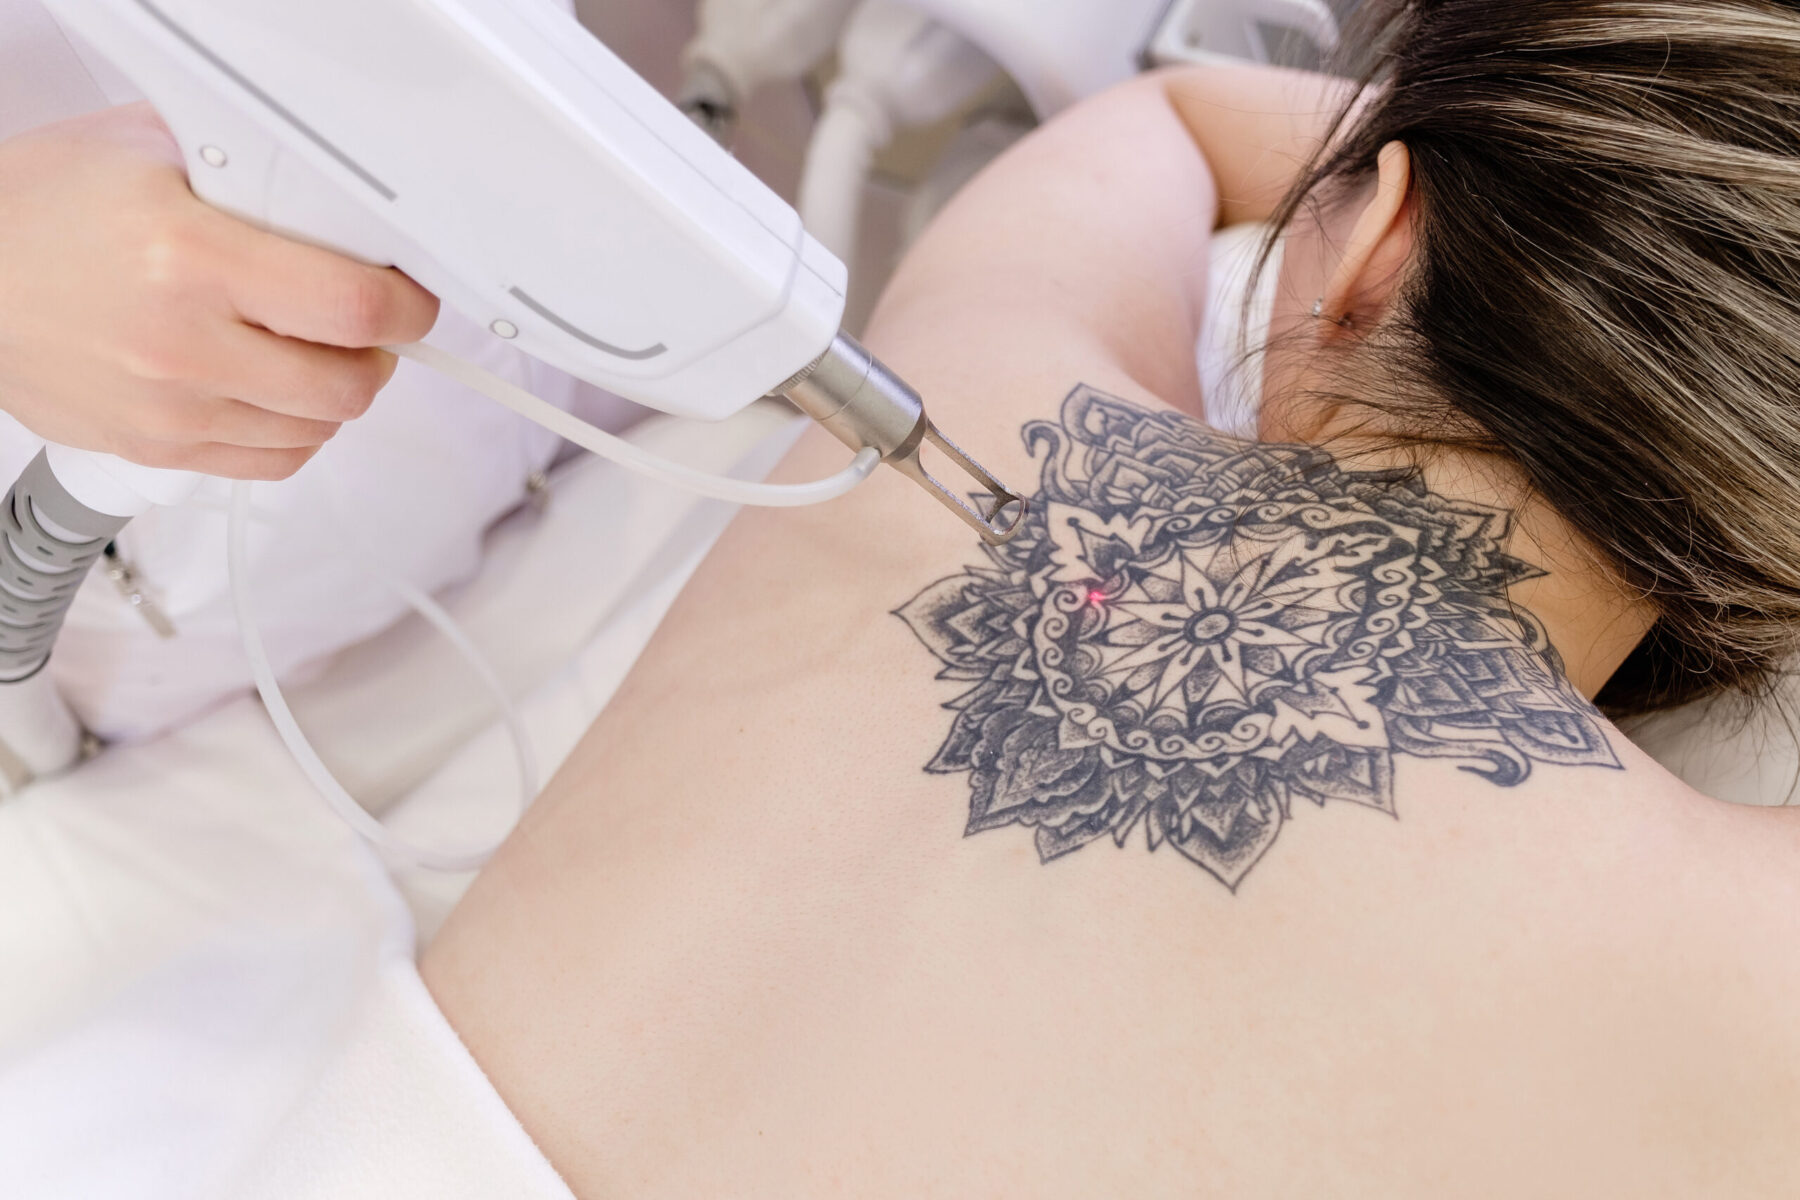 Can You Conduct Laser Hair Removal Over Tattoos?